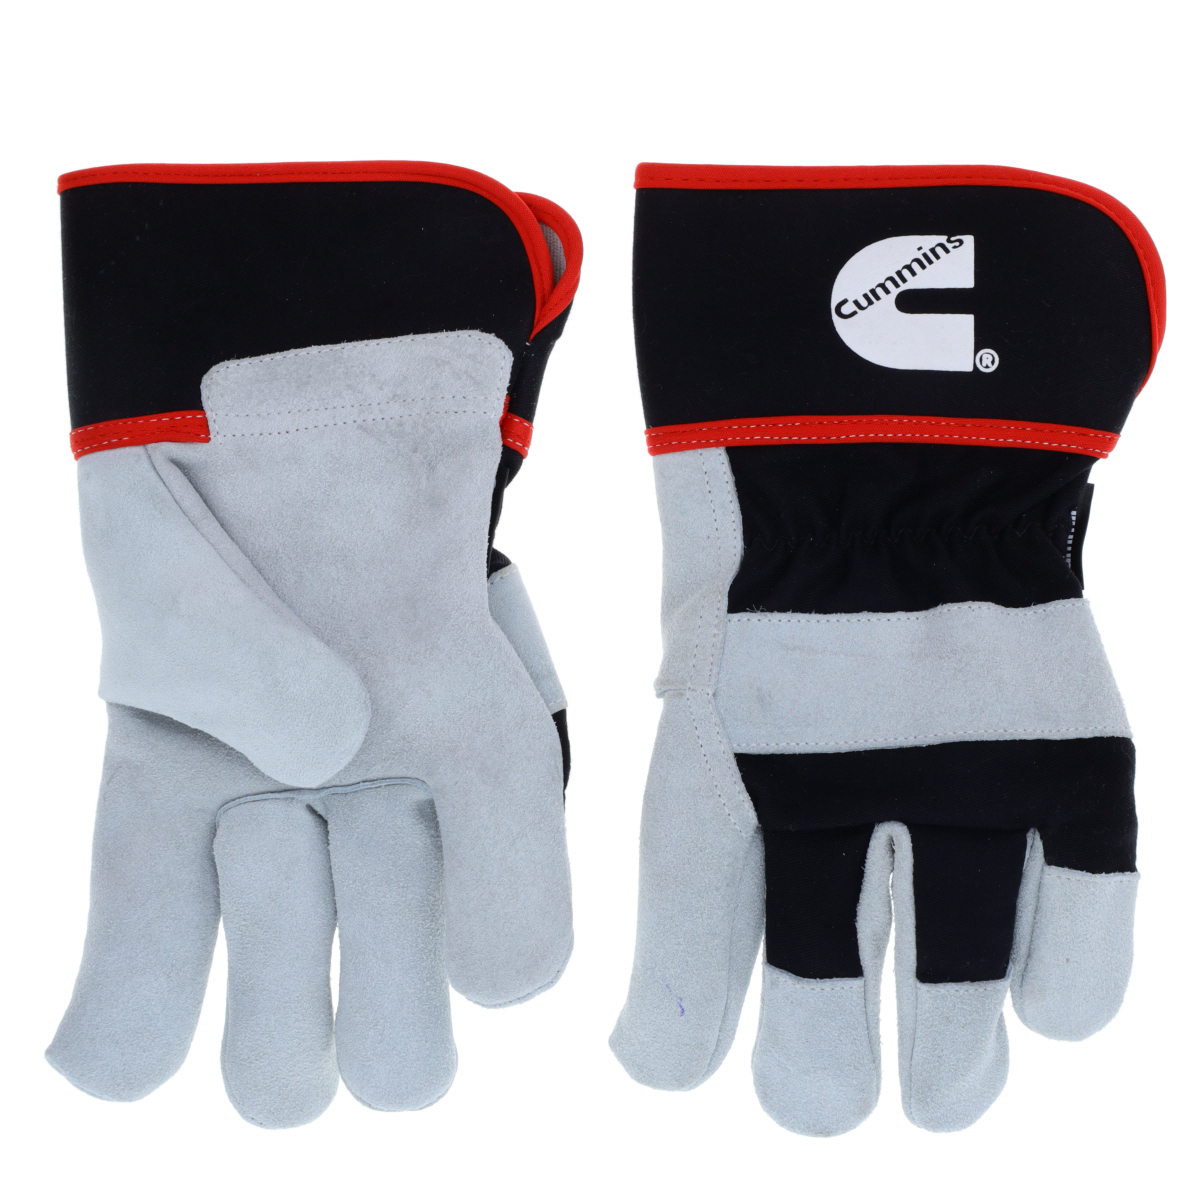 Cummins Split Leather Palm Gloves CMN35150 - Mens Leather Work Gloves Heavy Duty Warehouse Gloves for Men with Safety Cuff and L